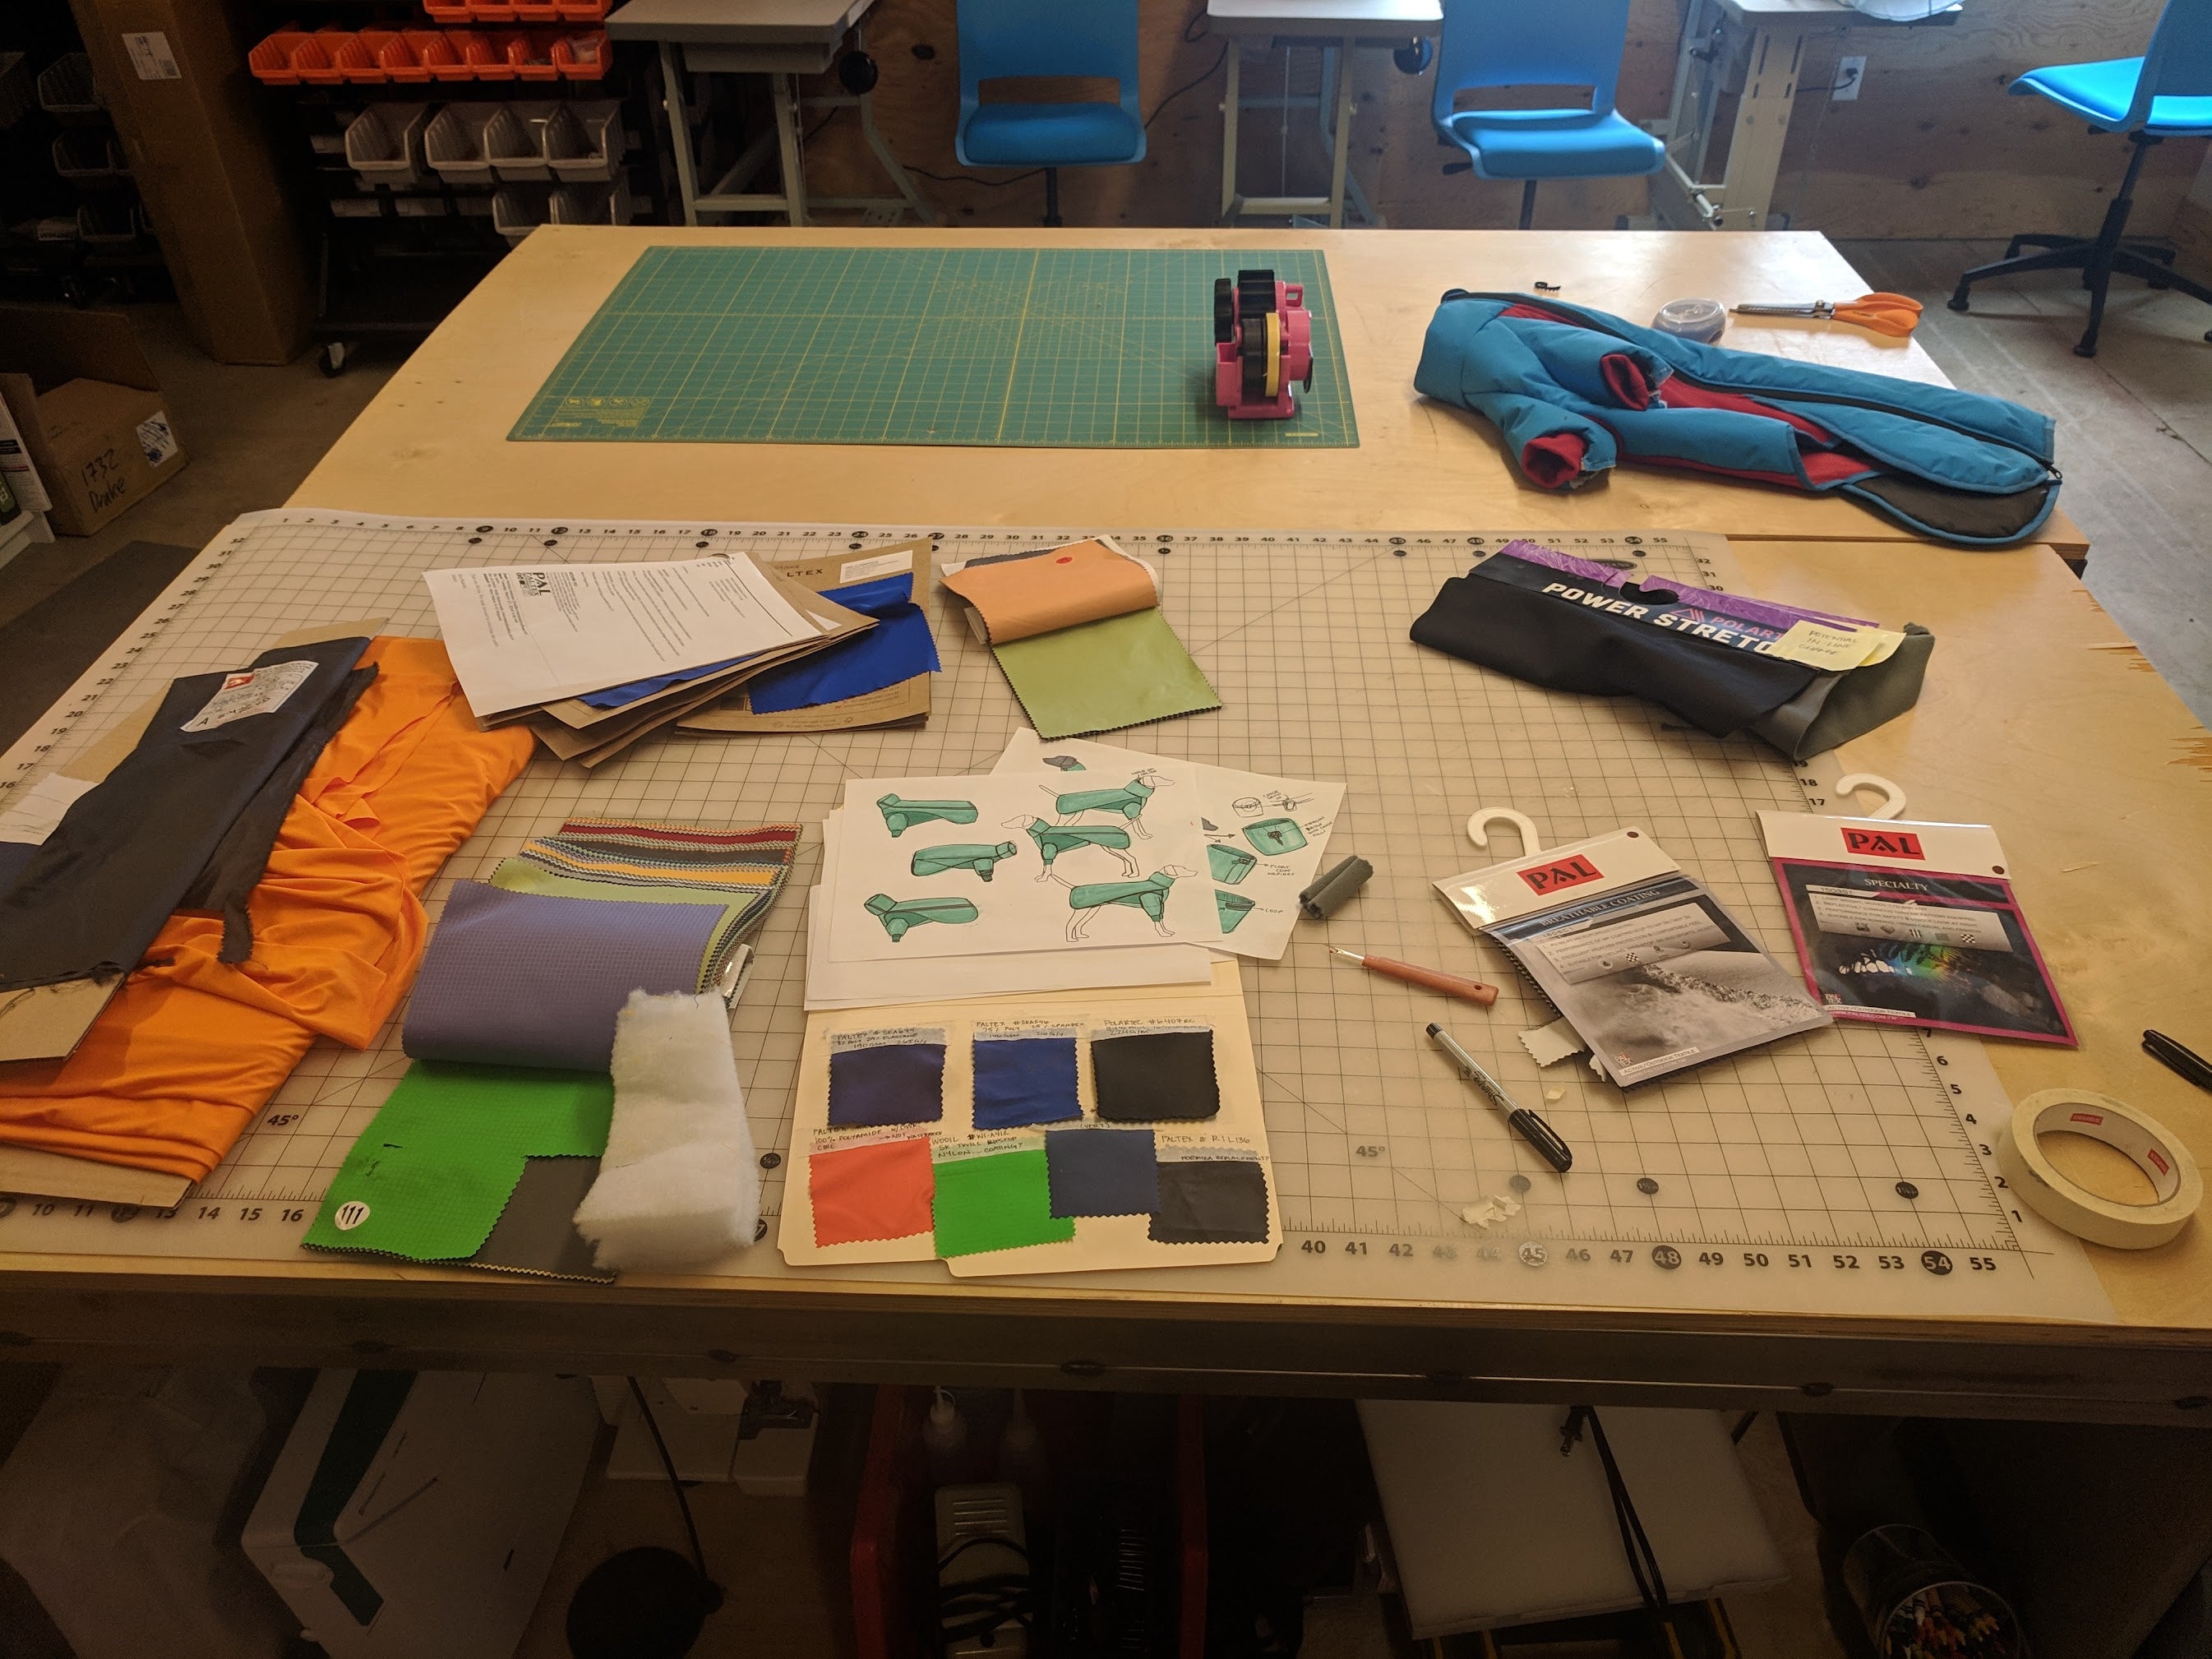 Designer's workbench with materials, prototypes, and sewing tools